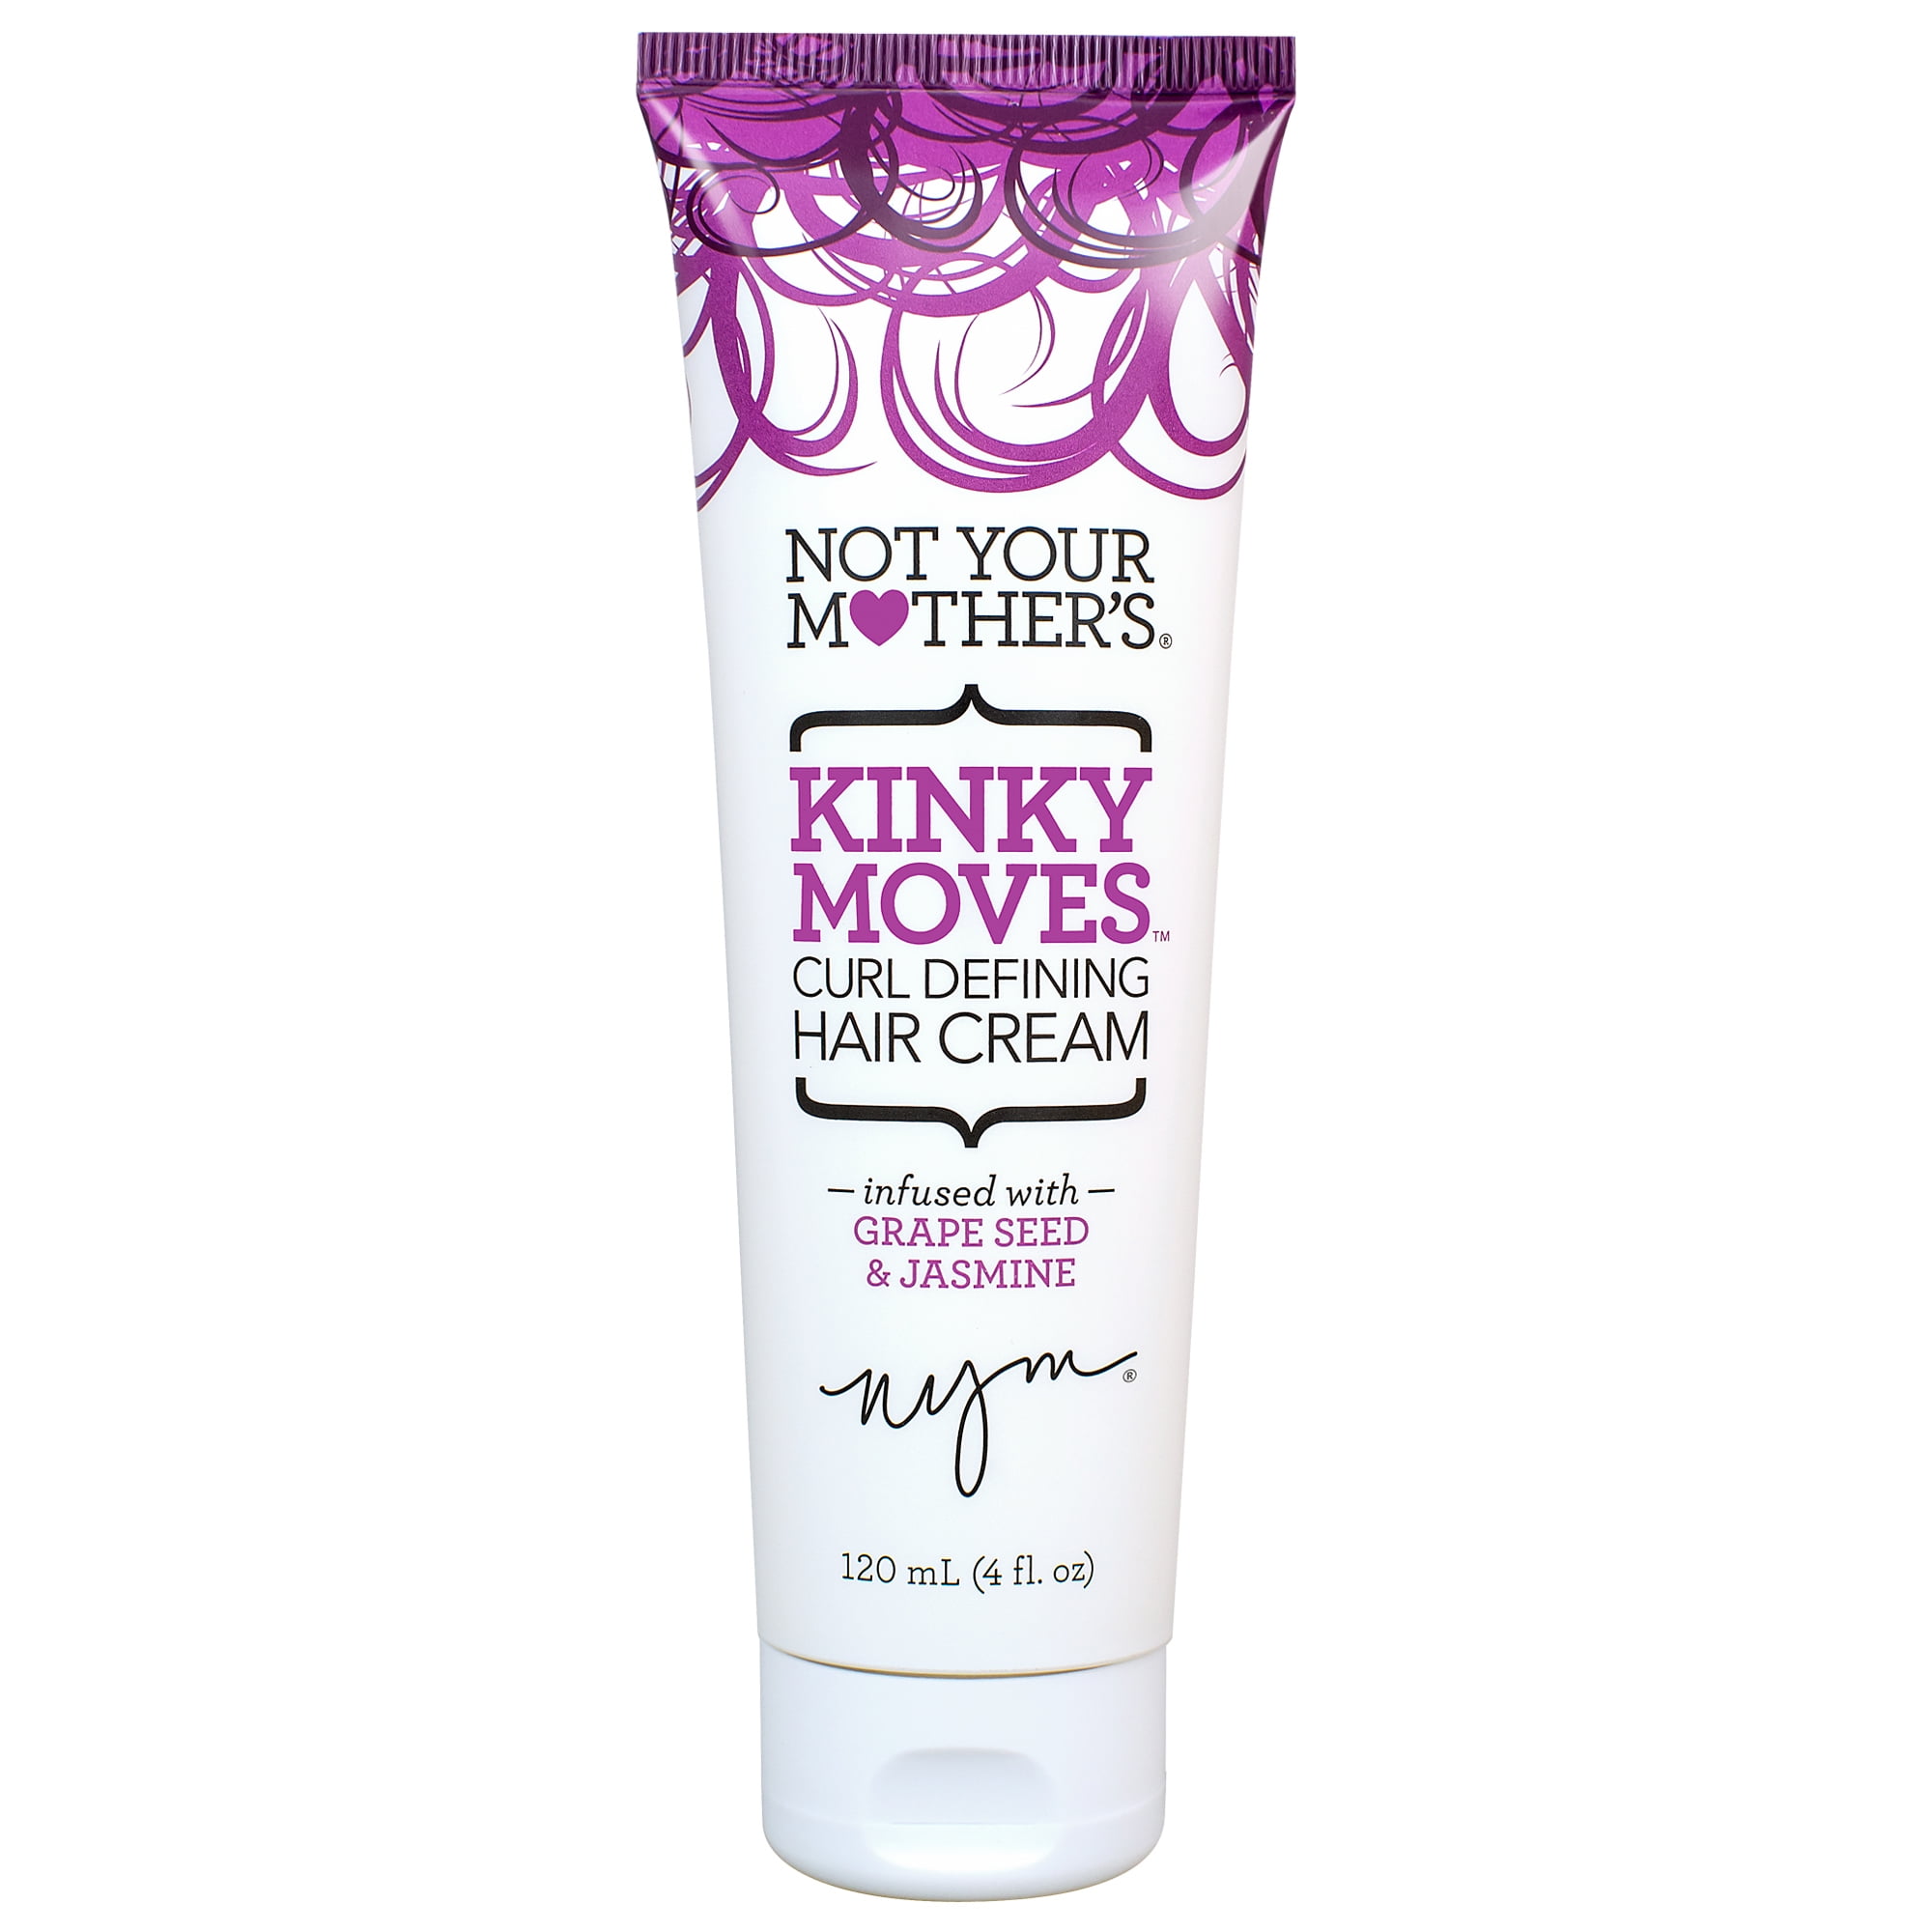 Not Your Mother's Kinky Moves Curl Defining Hair Cream, 4 oz